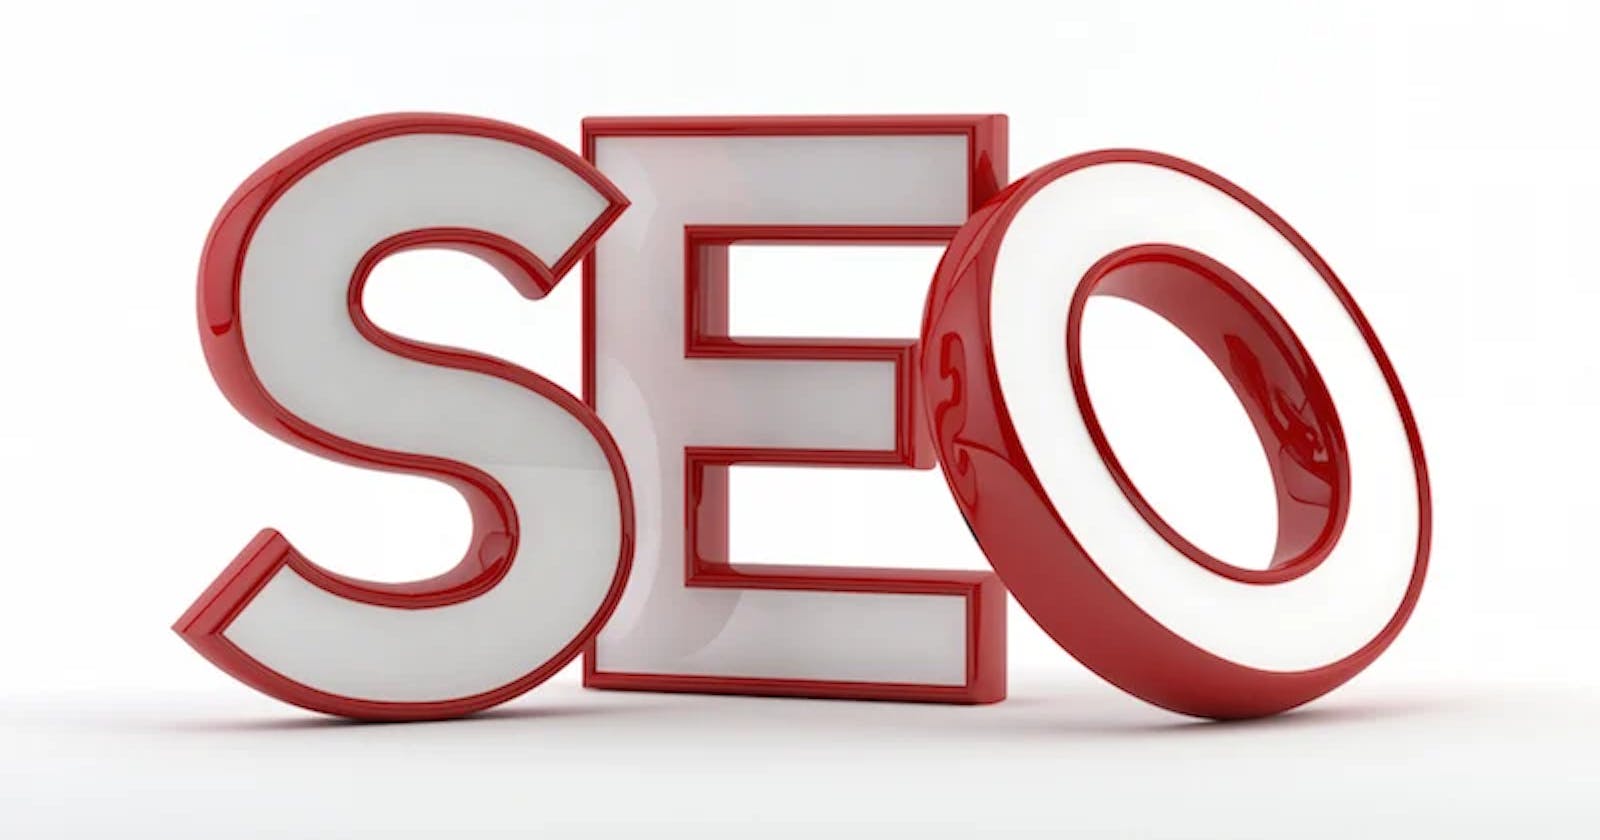 SEO update you need to make right away for better Google Ranking